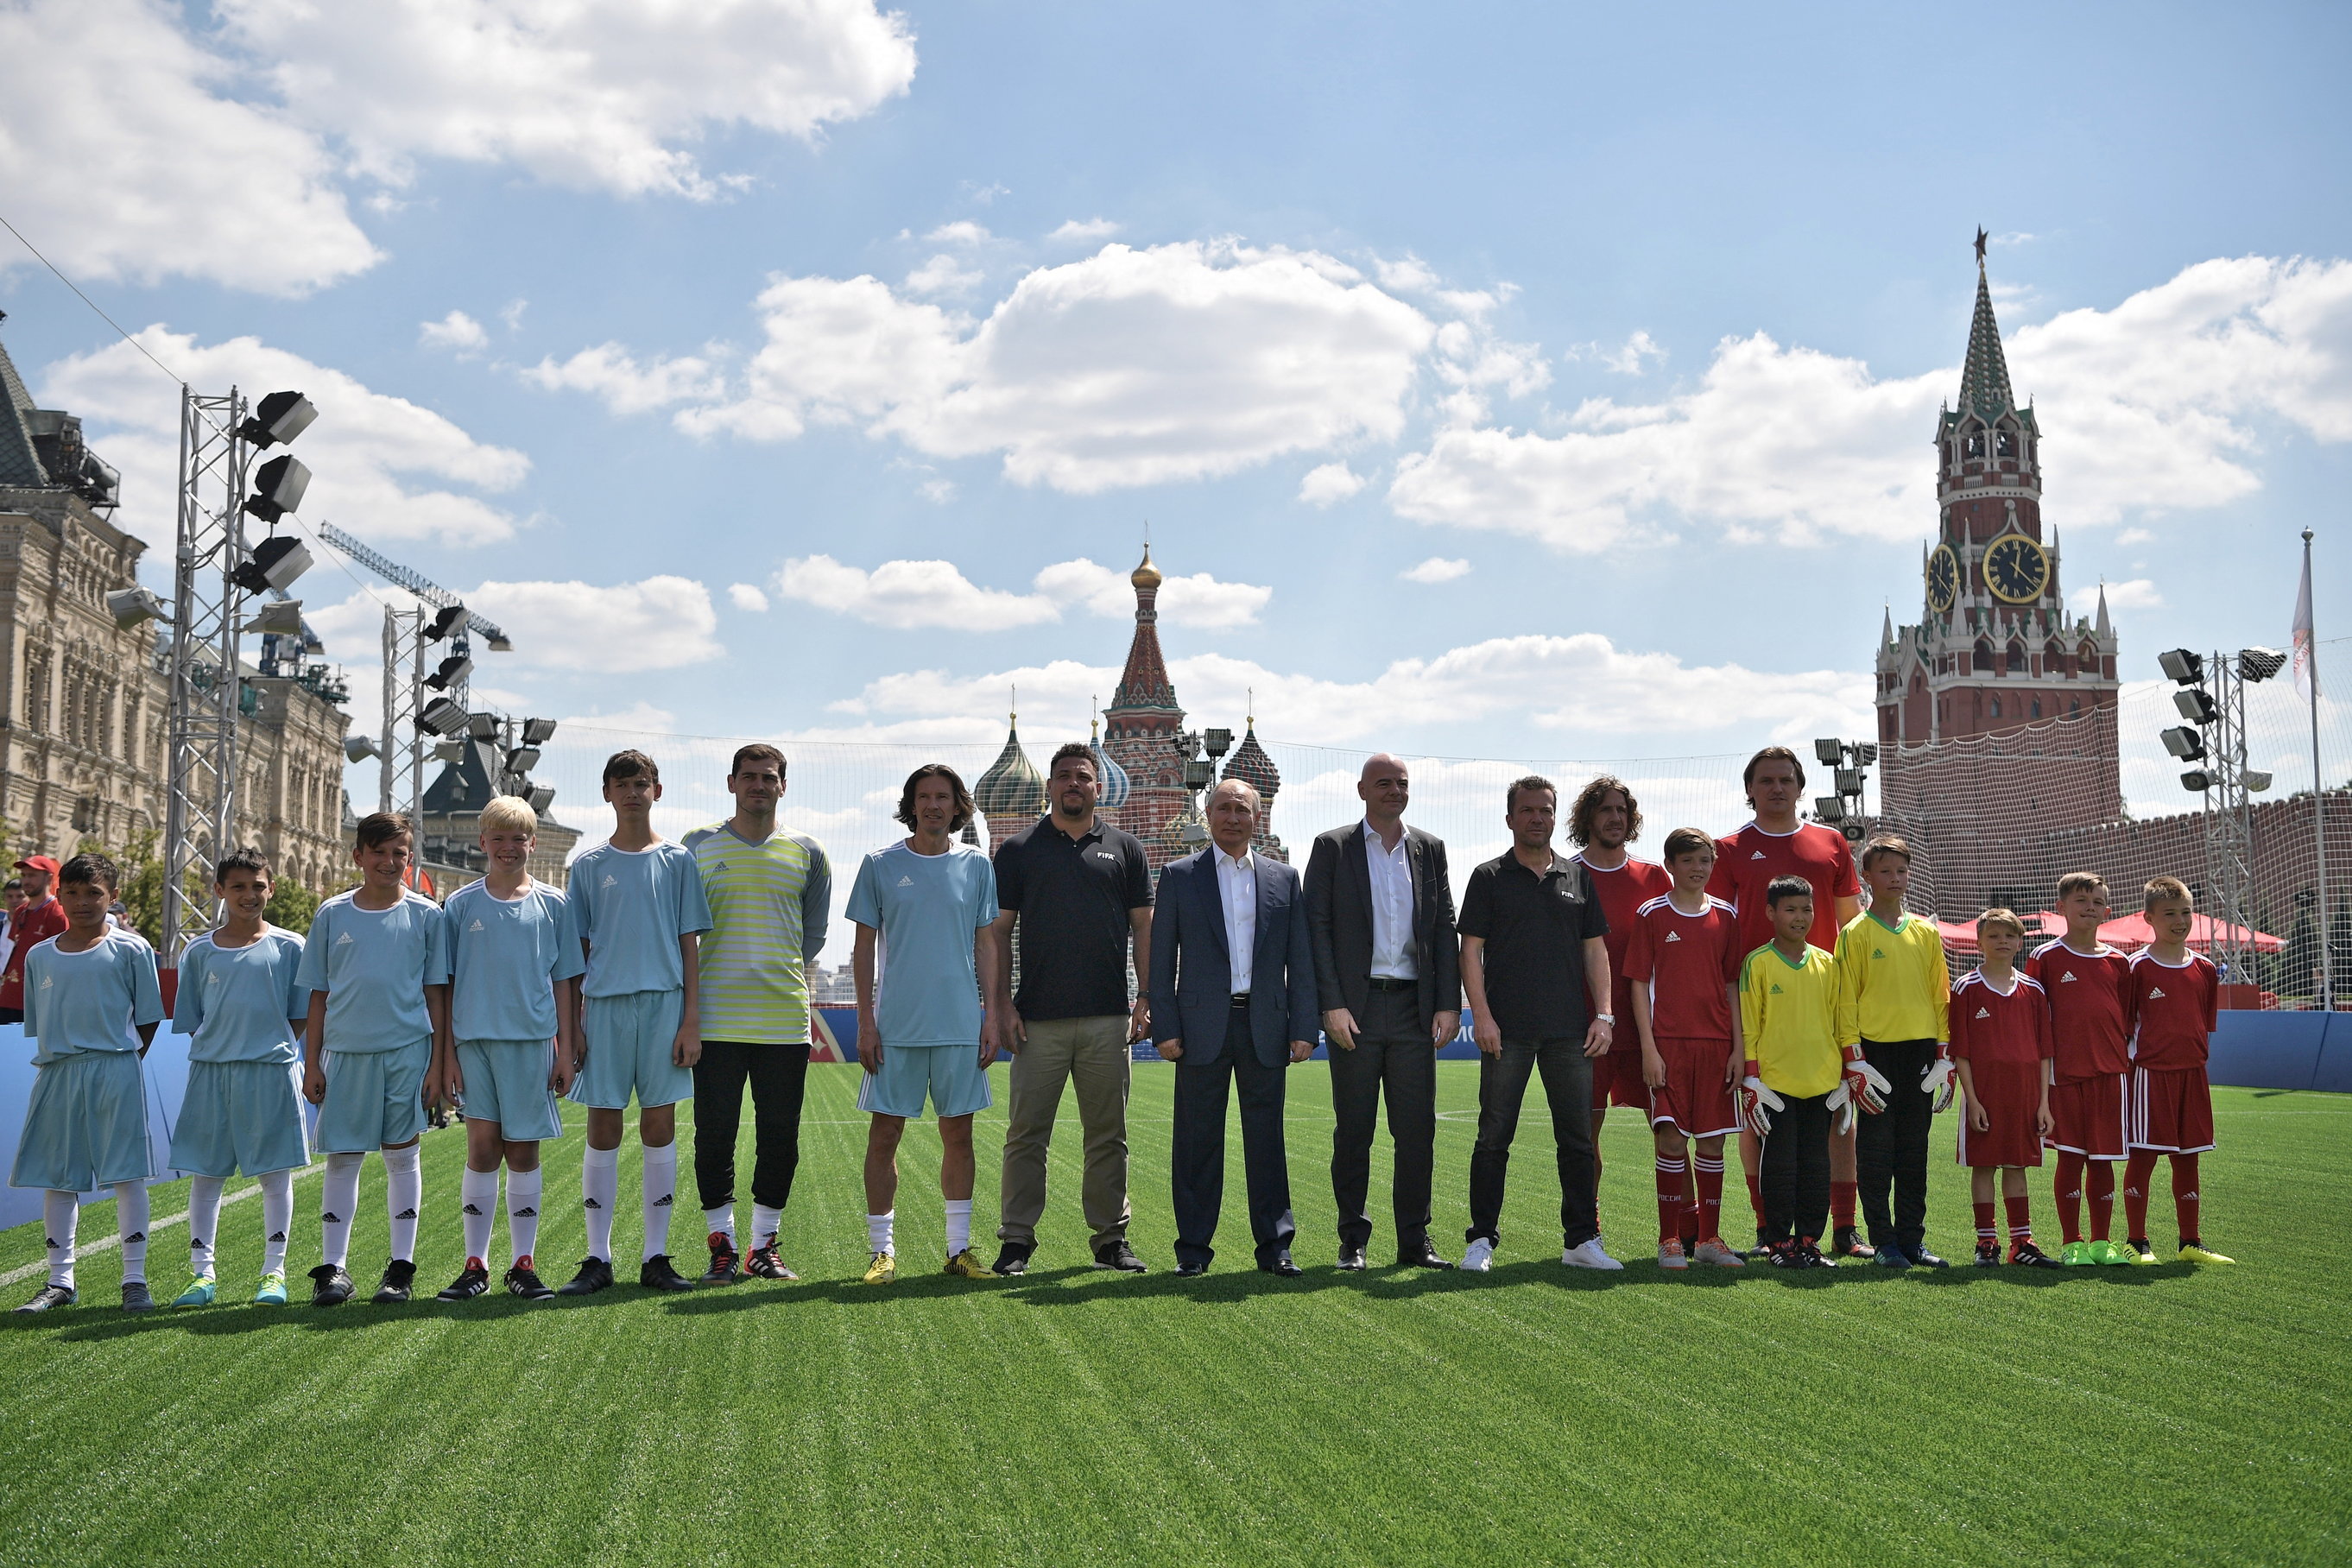 epa06846899 Russian President Vladimir Putin (C) attends a friendly children soccer match while visiting  the themed 2018 FIFA World Cup Football Park on Red Square in Moscow, Russia, 28 June 2018  EPA/ALEXEI NIKOLSKY/SPUTNIK/KREMLIN POOL / POOL MANDATORY CREDIT